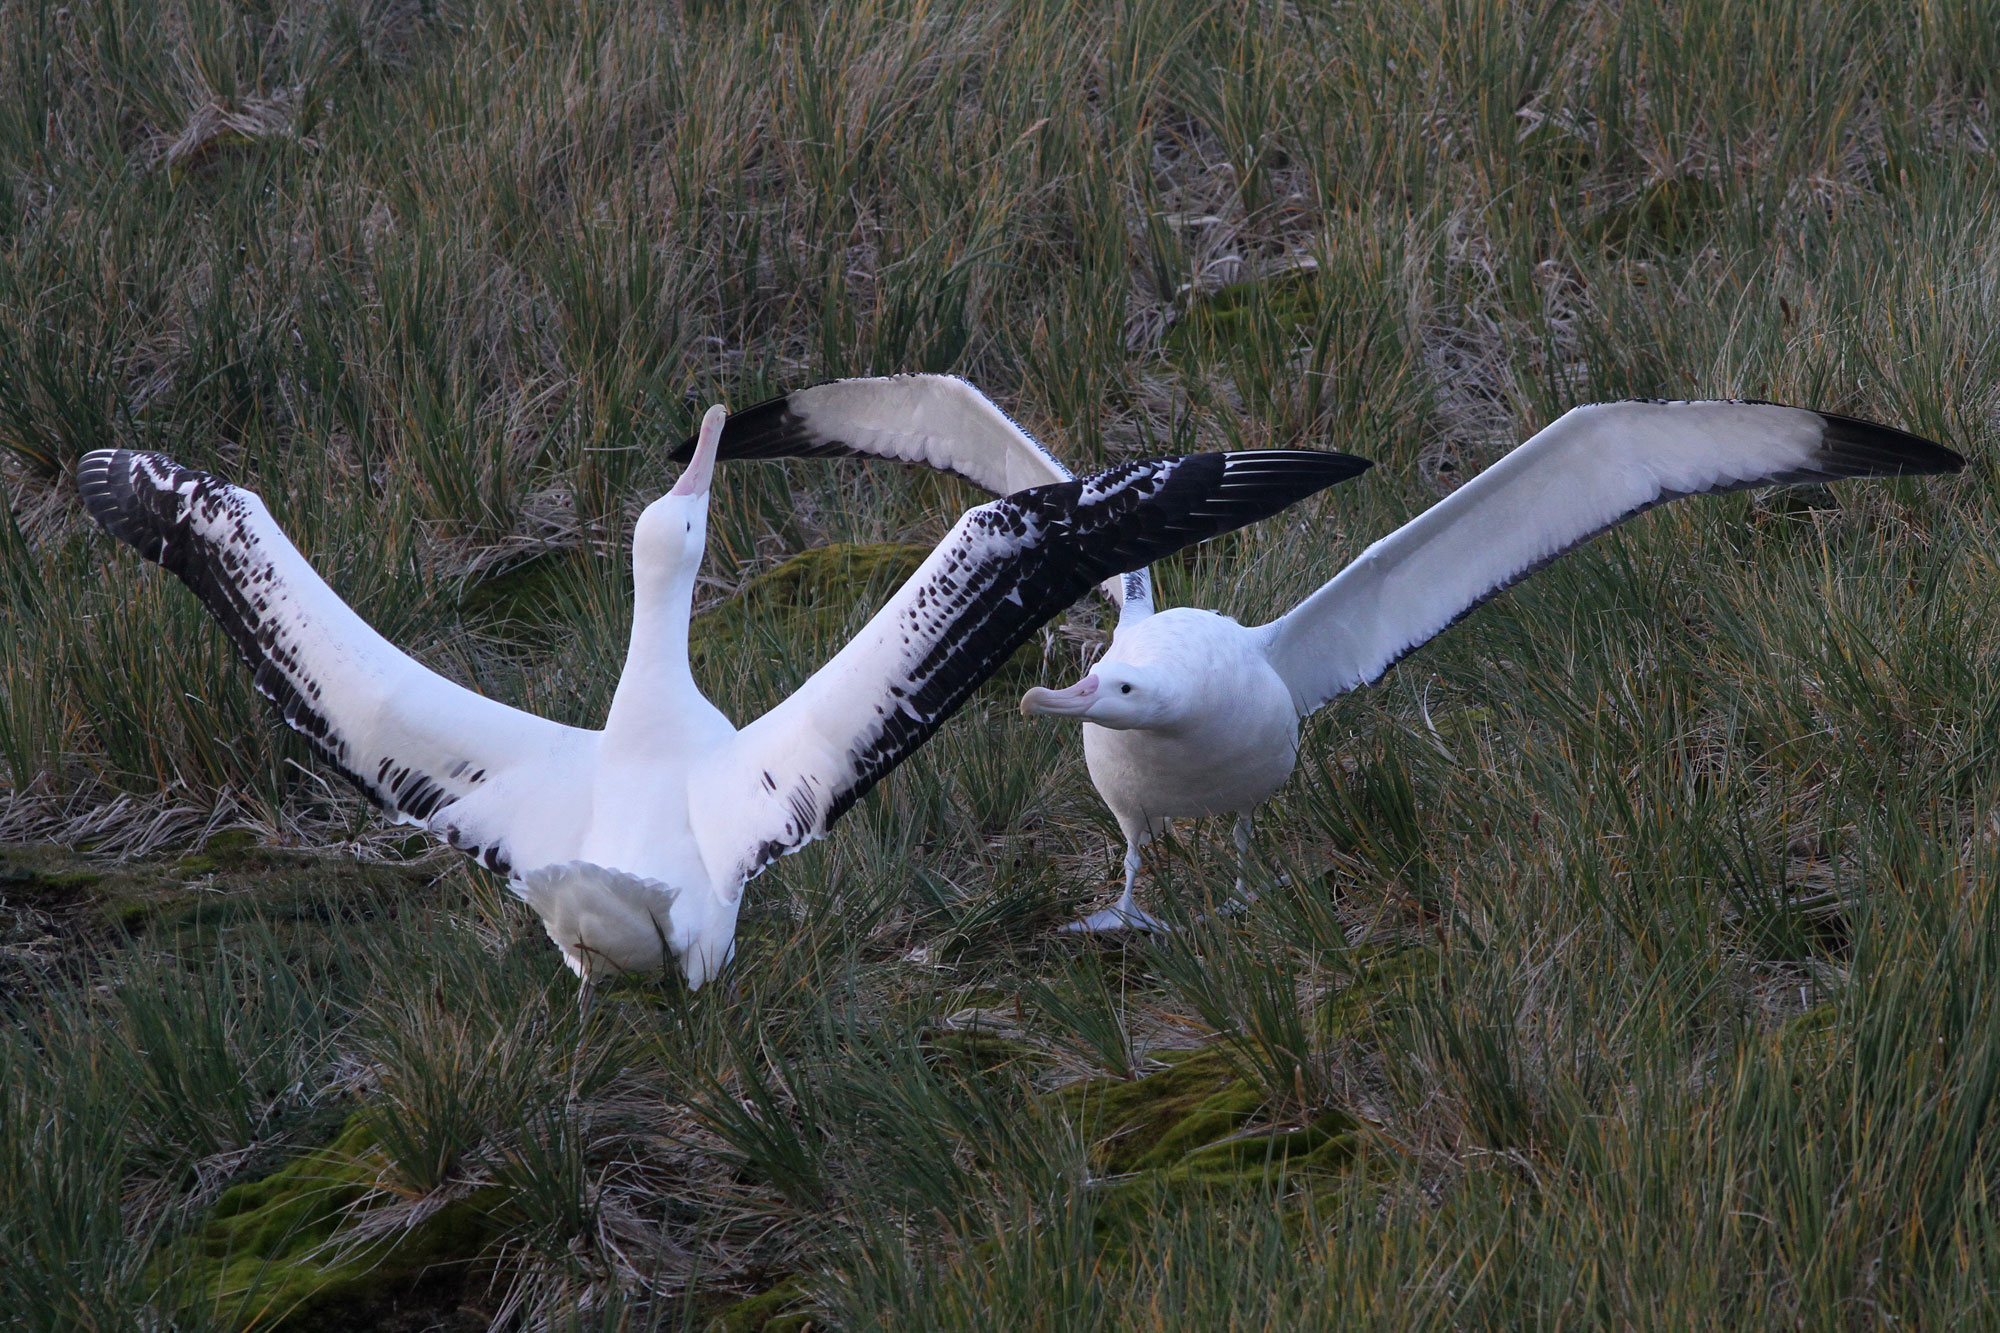 Wandering Albatross perform a courtship dance on the island of South Georgia, our first birding destination on the South Georgia to Cape Verde expedition. Photo: Noah Strycker